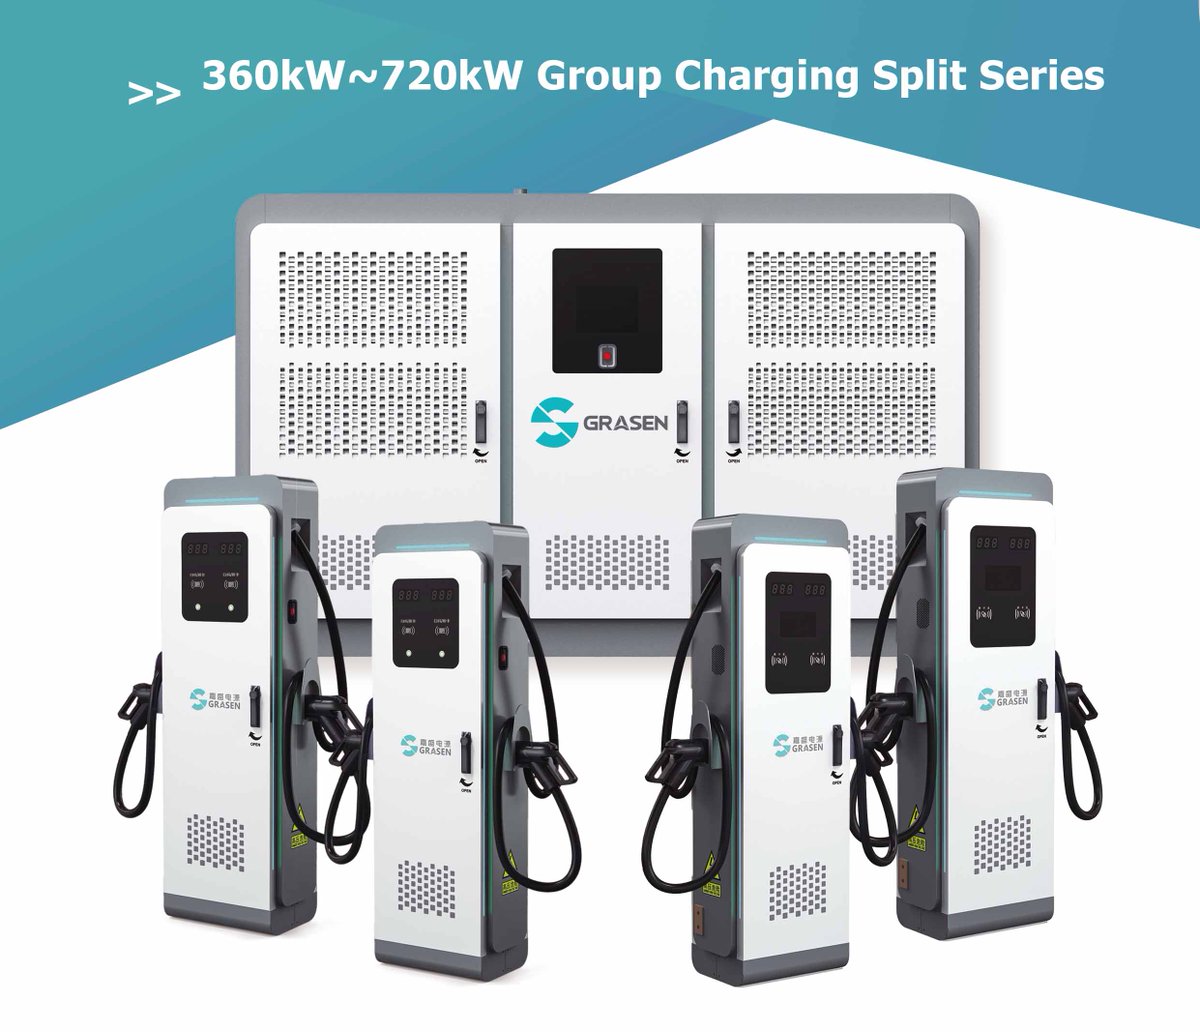 2023 Grasen launched the New Product~360kw-720kw group charging split charging pile series
📷More economics
📷More stable
📷More efficient
📷Morequieter
📷More technology
#evchargingsolutions #HighPowered #chargingsystem #chargingpile #evcharging #electricvehicle #charger #360kw